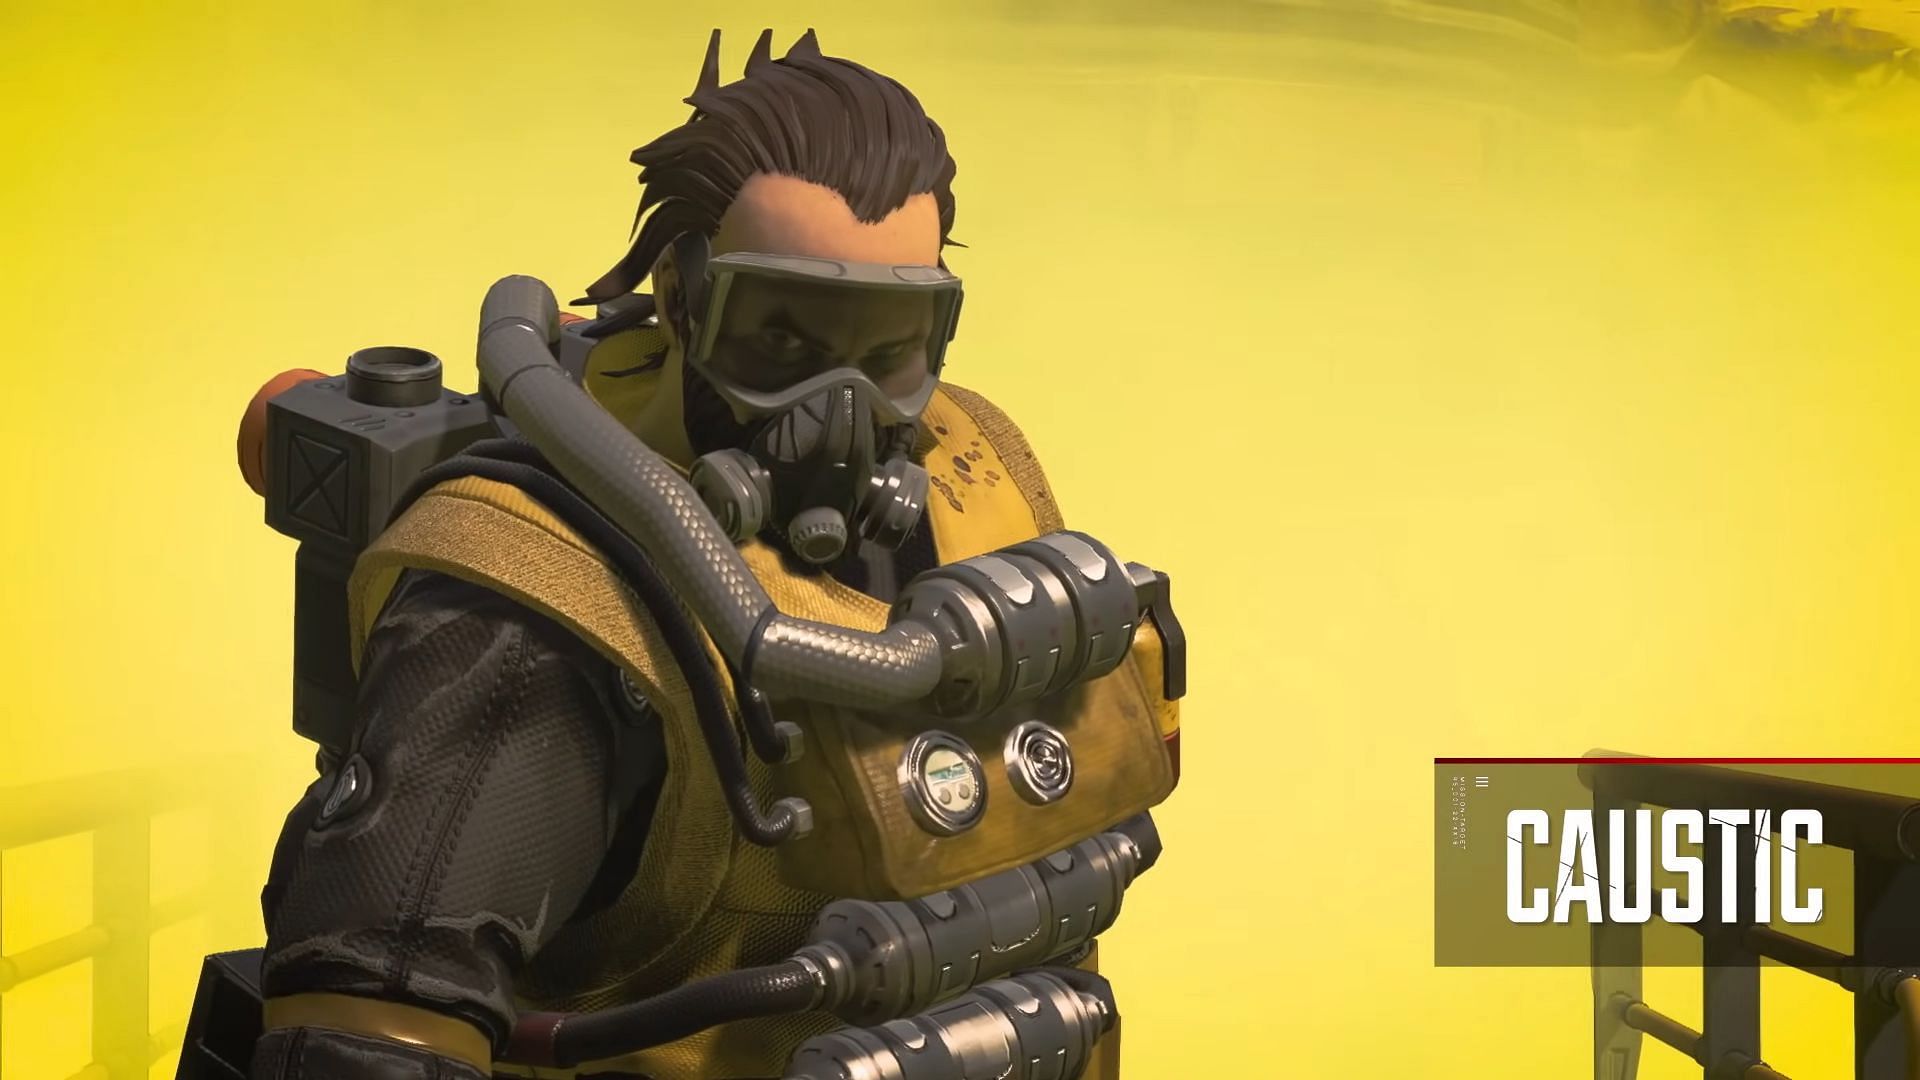 Caustic is one of the most formidable Controlles class character in Apex Legends , Caustic skins in Apex Legends